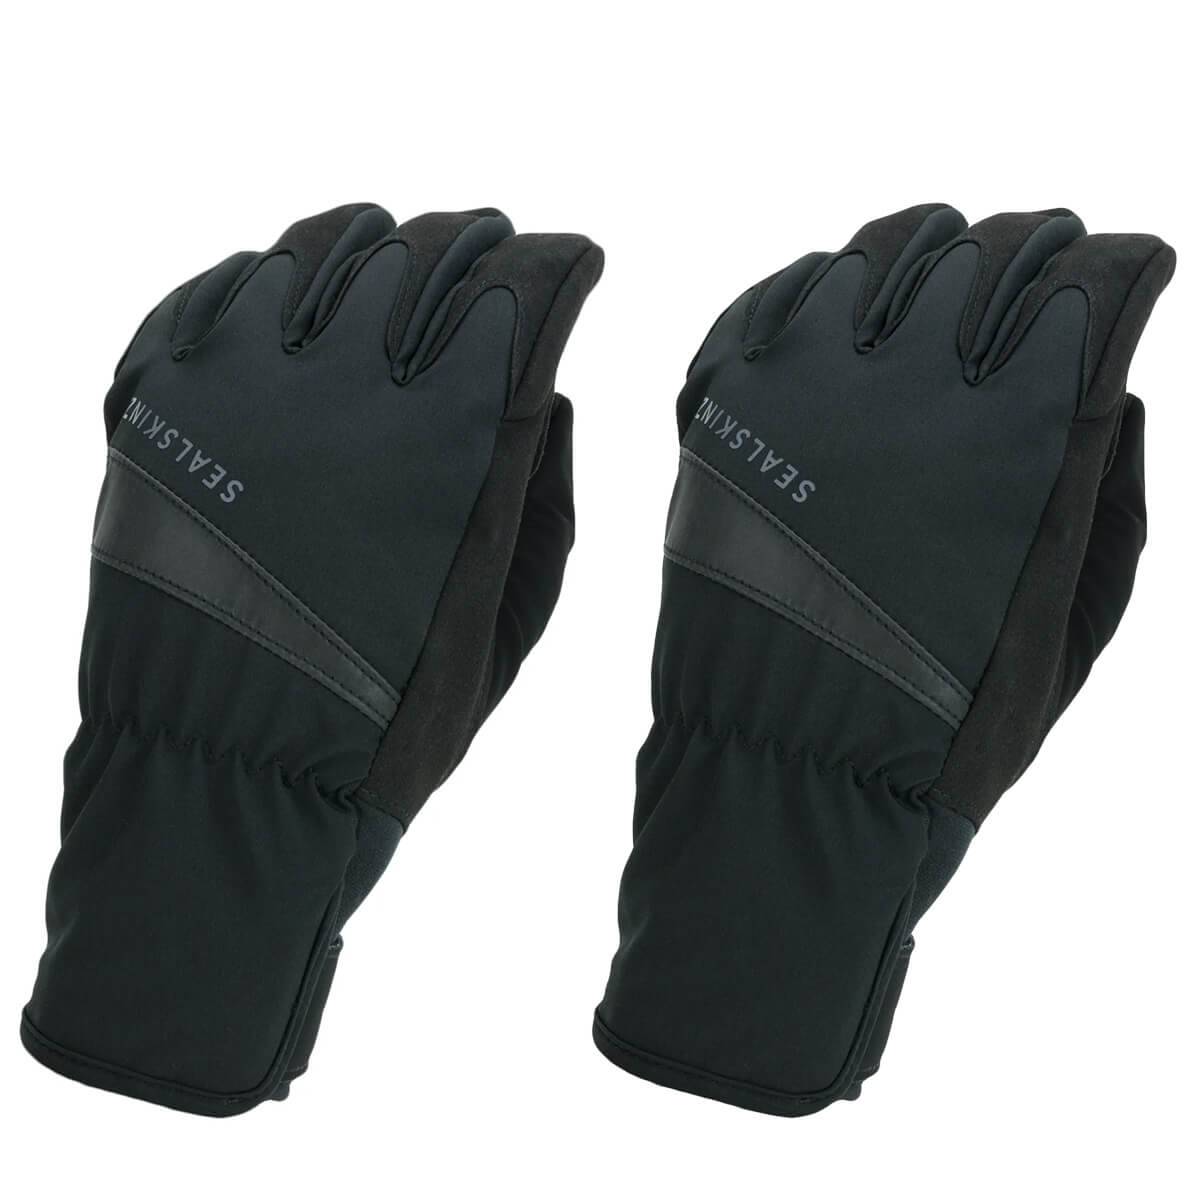 Sealskinz Waterproof All Weather Cycle Gloves - John Bull Clothing